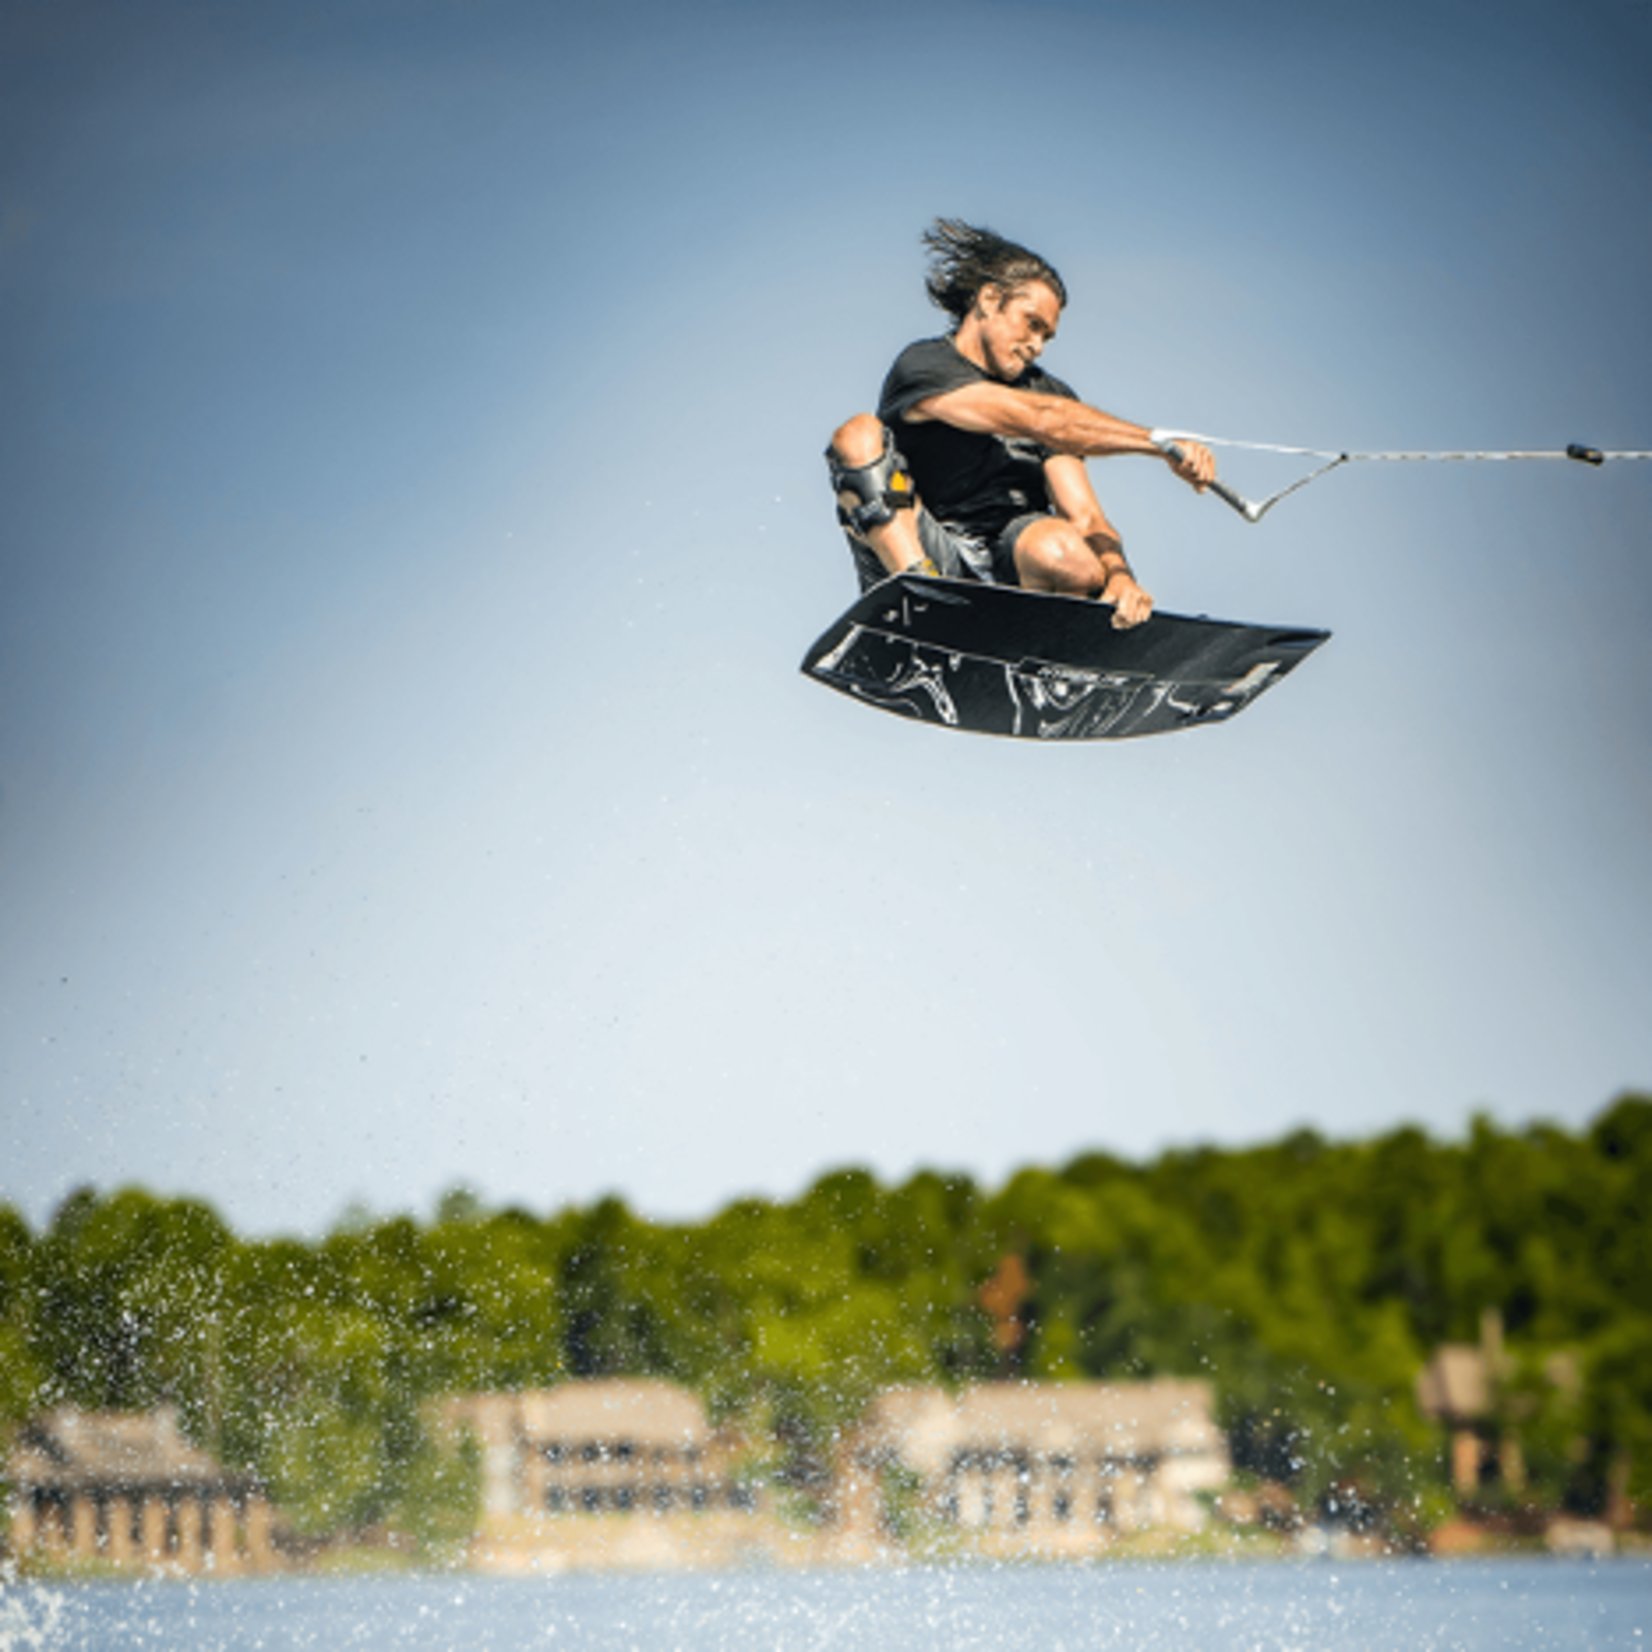 HO/Hyperlite 2023 Cryptic Wakeboard